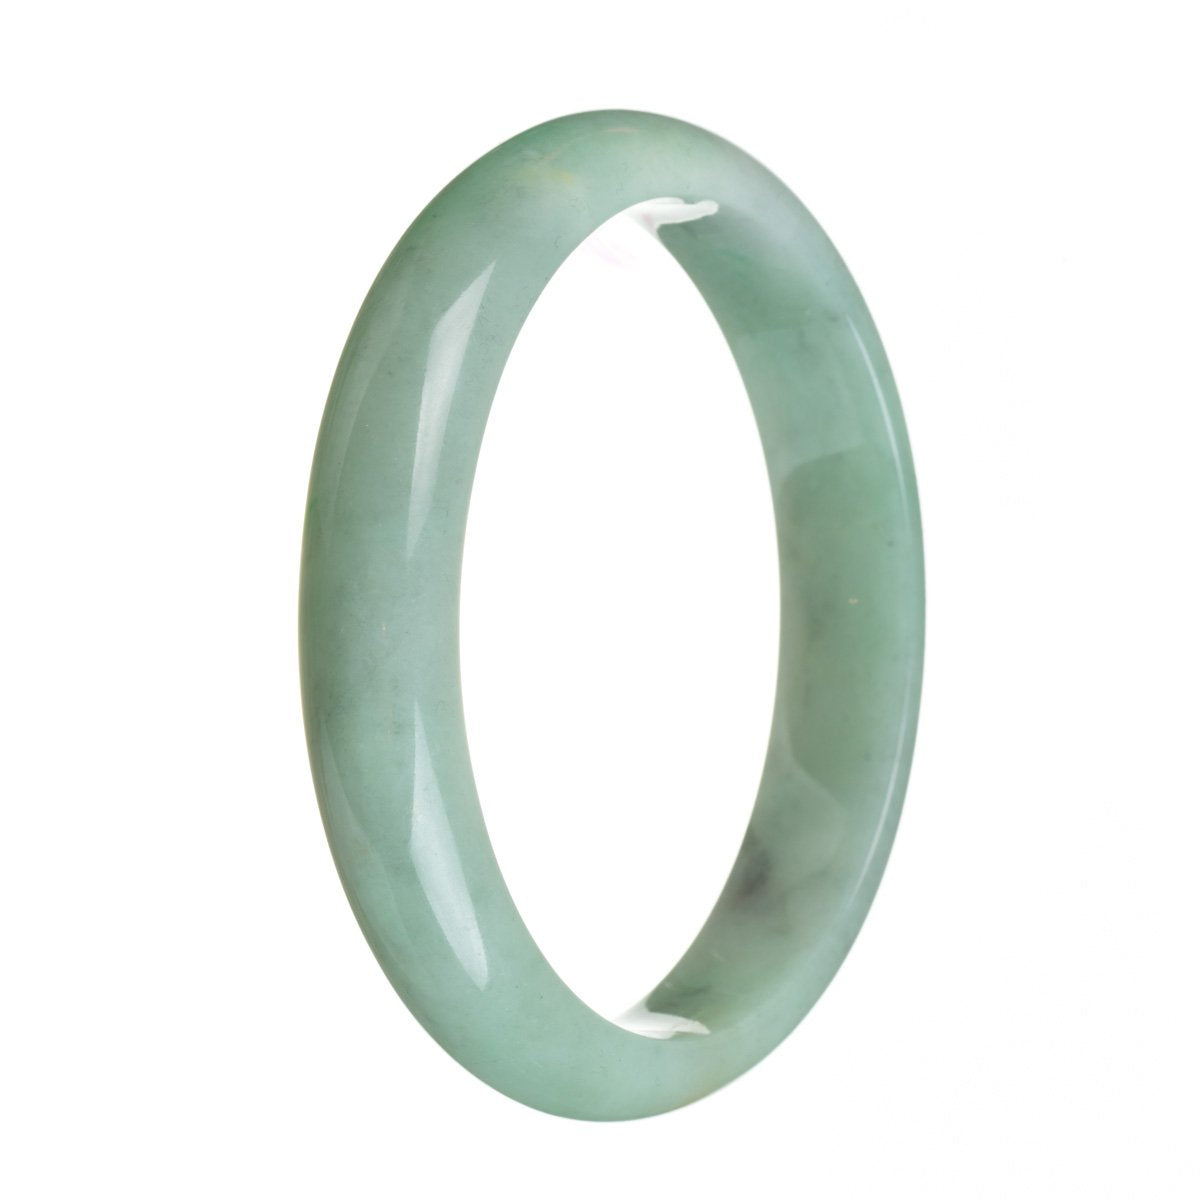 A beautiful light green jadeite bracelet in a half moon shape, measuring 83mm. Perfect for adding a touch of elegance to any outfit.